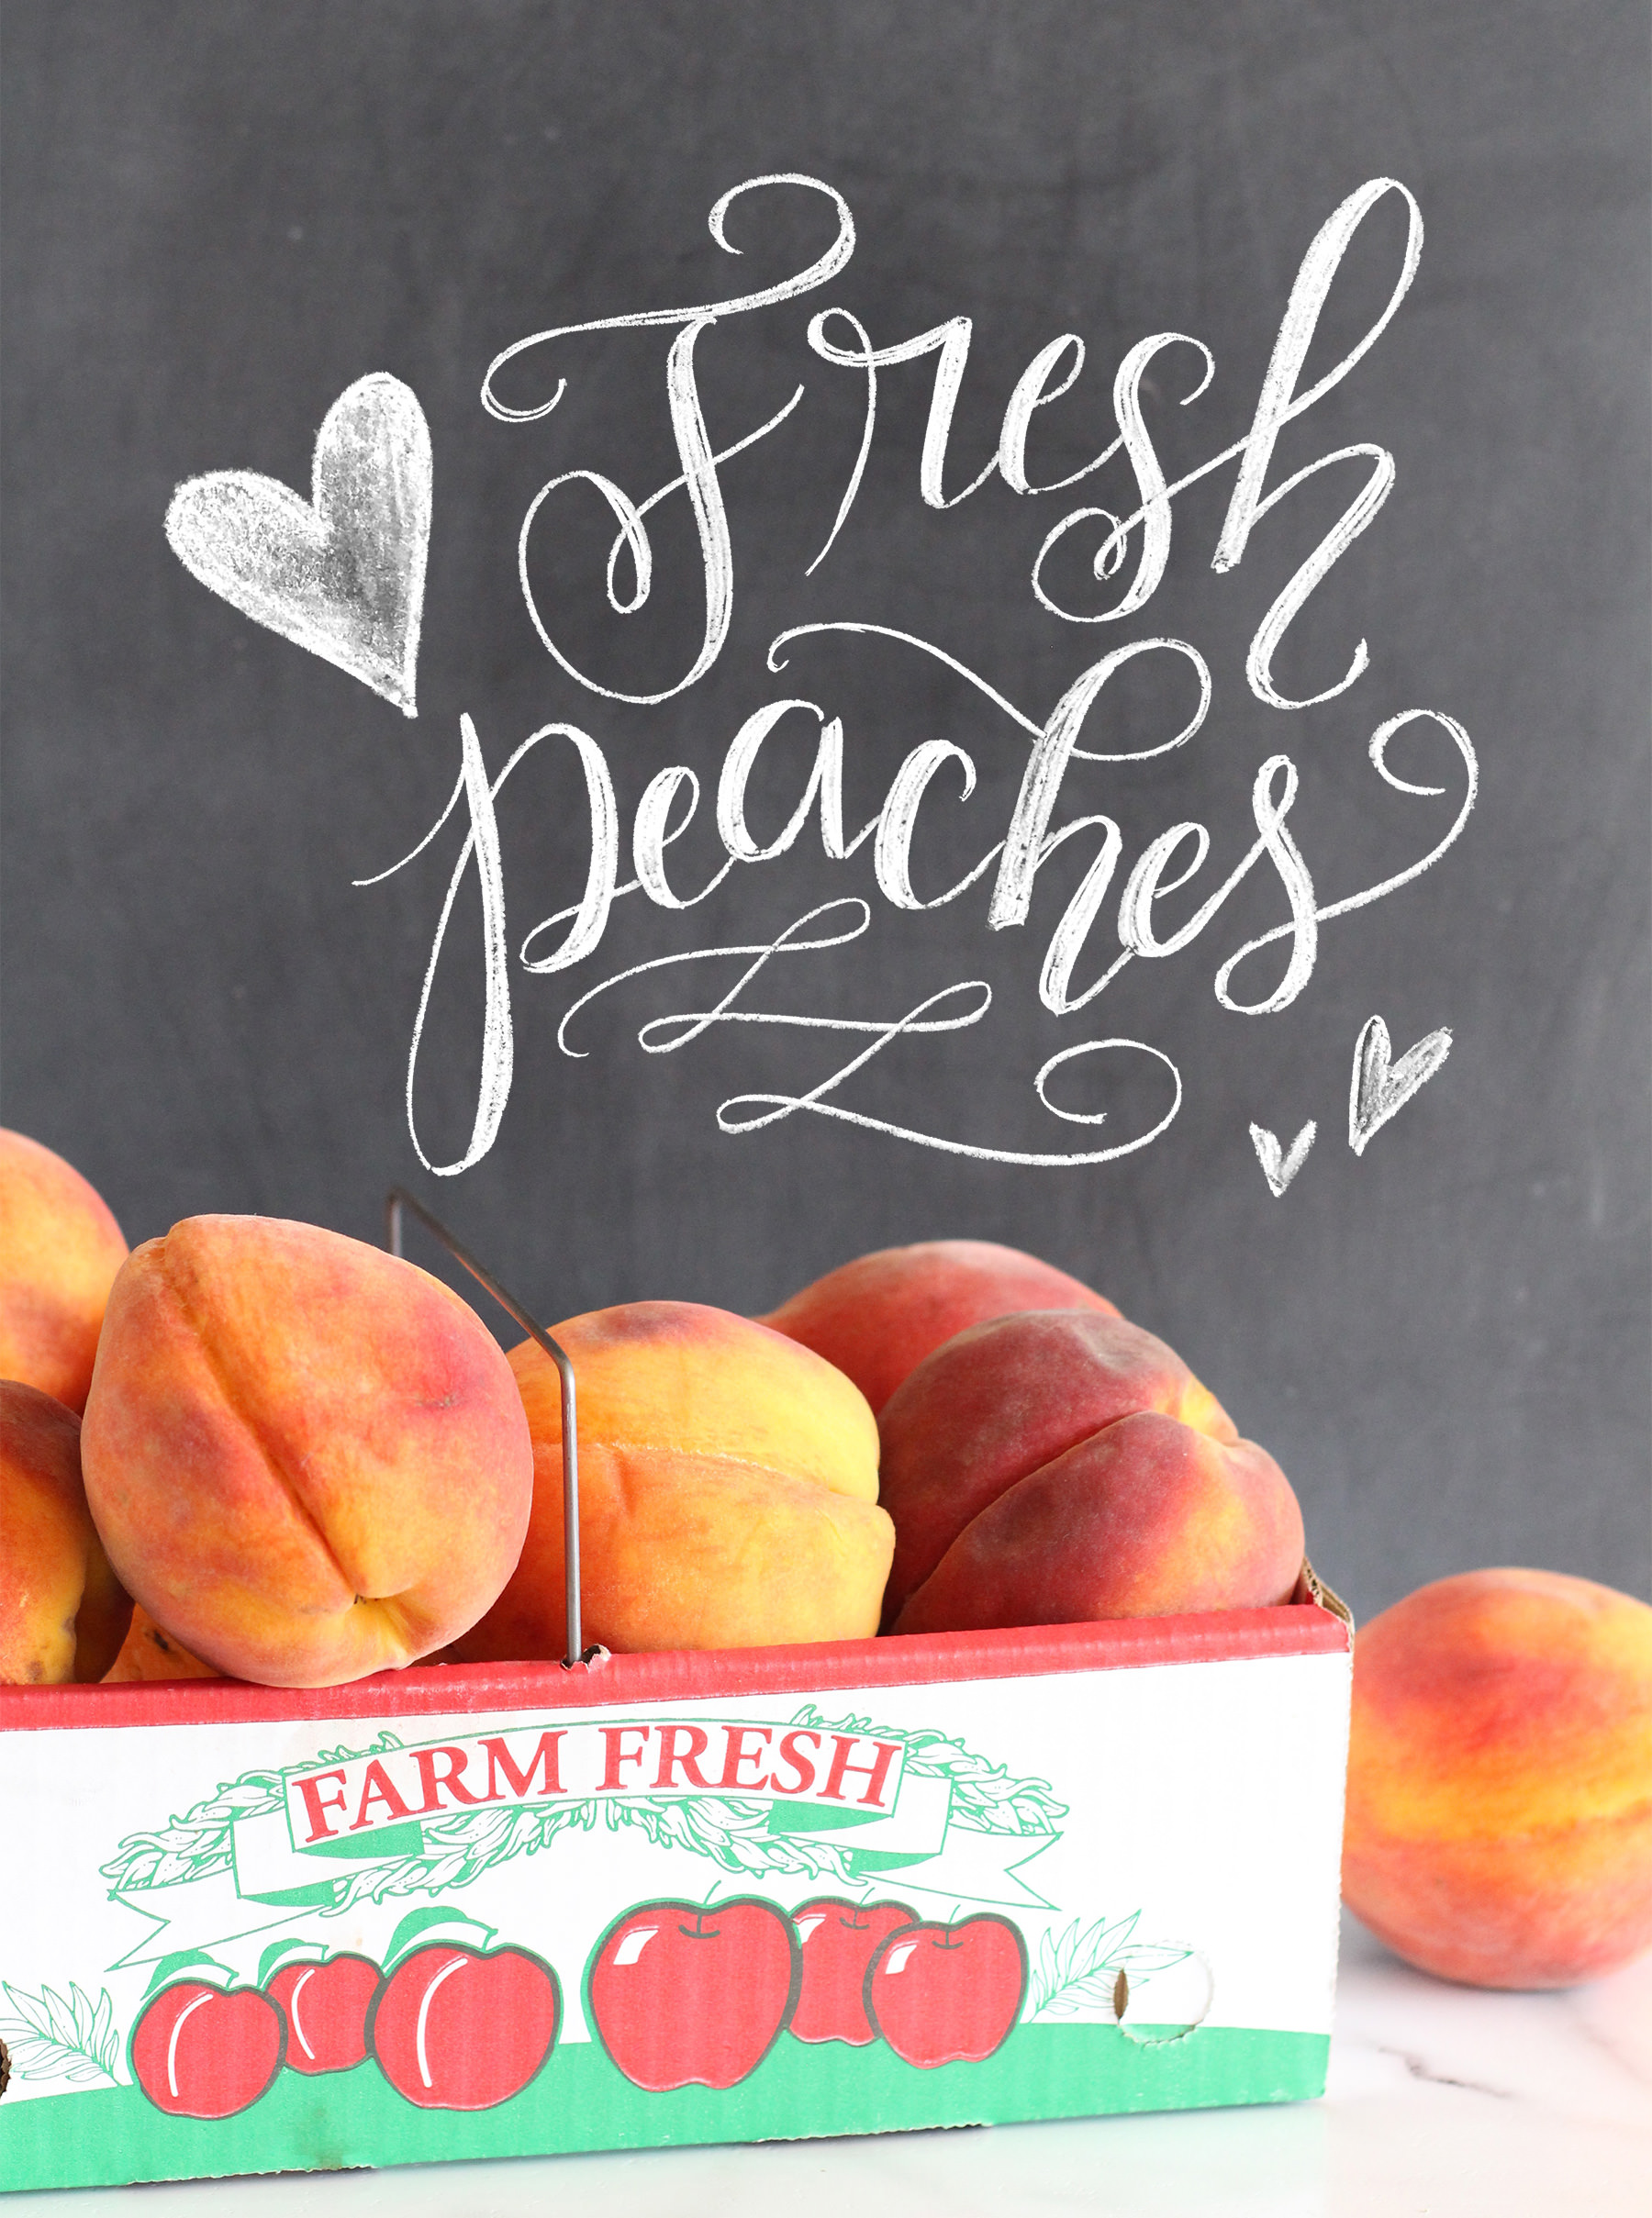 How to use those fresh peaches: make a peach cobbler! Recipe on Lily & Val Living along with an illustrated recipe print.